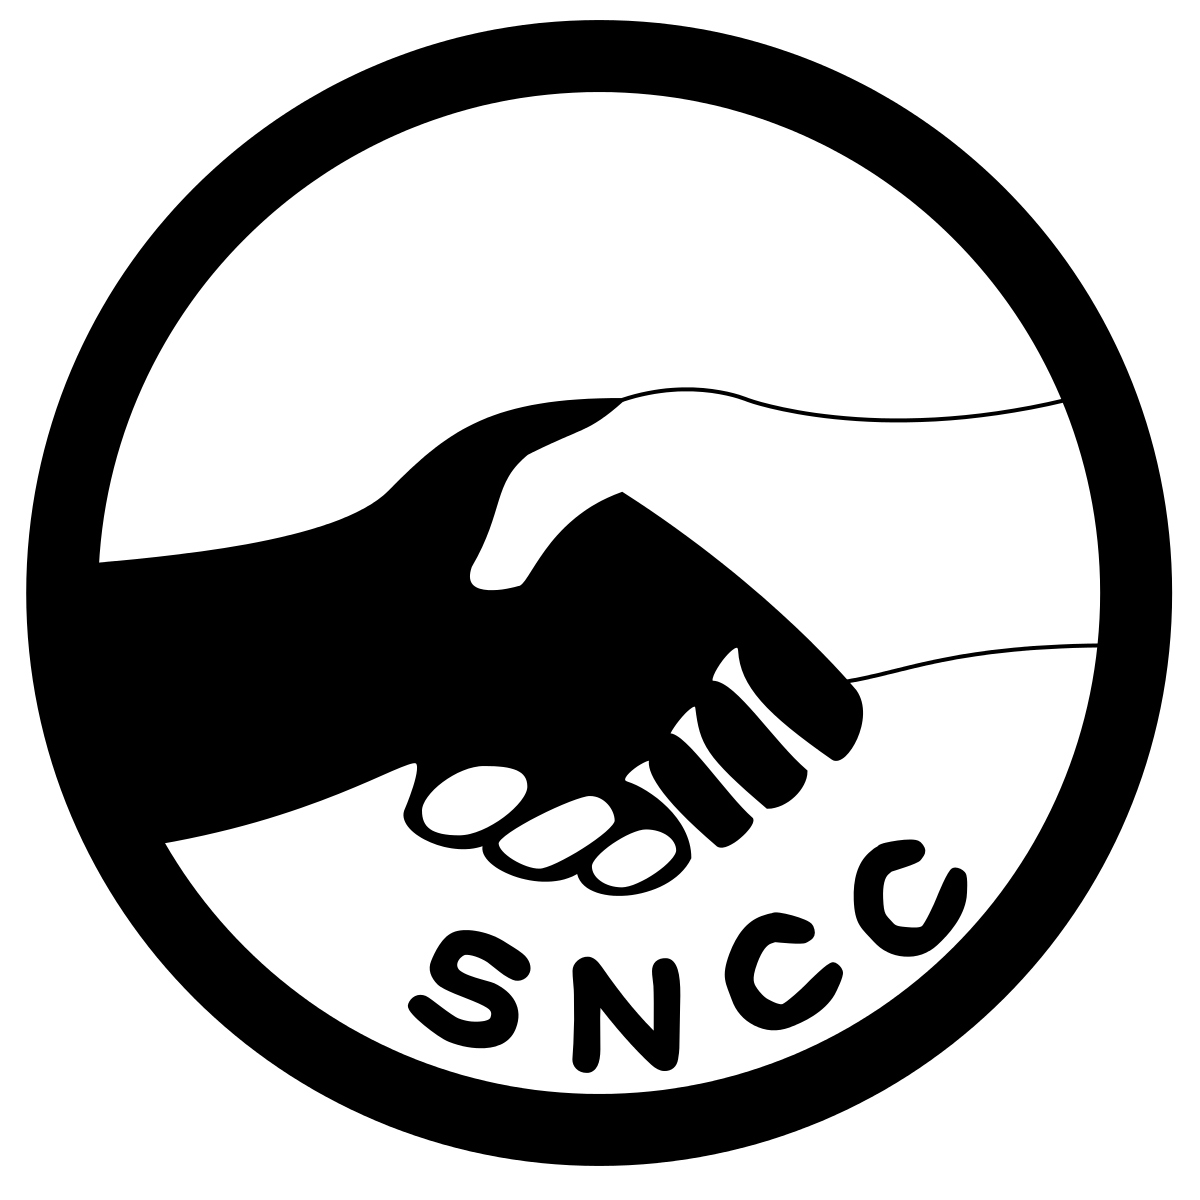 Student nonviolent coordinating committee. Jail clipart united states we the person